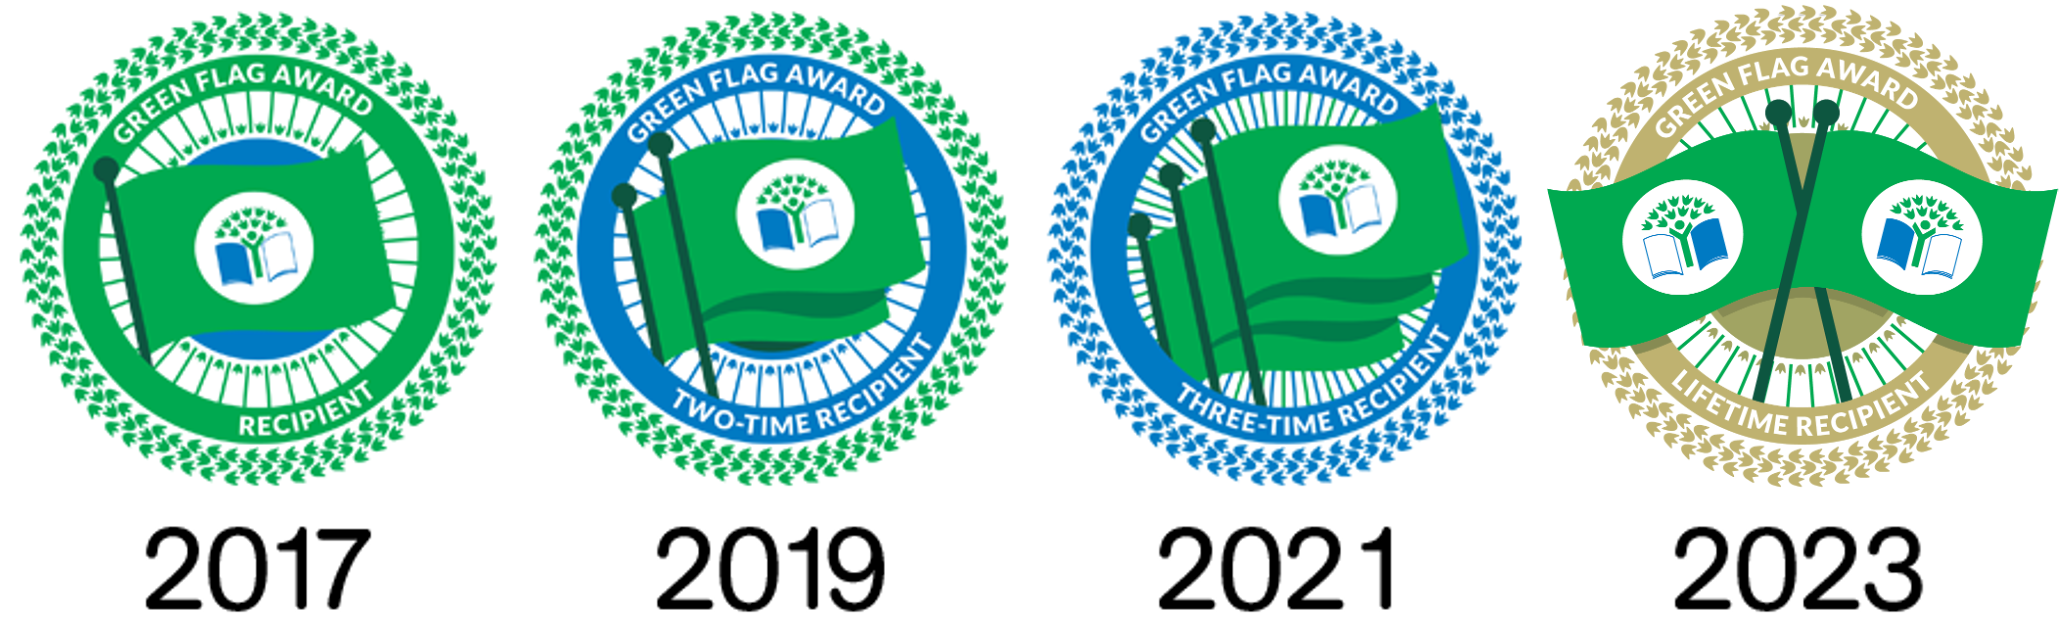 The four badges of the Eco-Schools USA Green Flag Awards. The first is 2017, the second is 2019, the third is 2021, and the final gold badge is 2023.